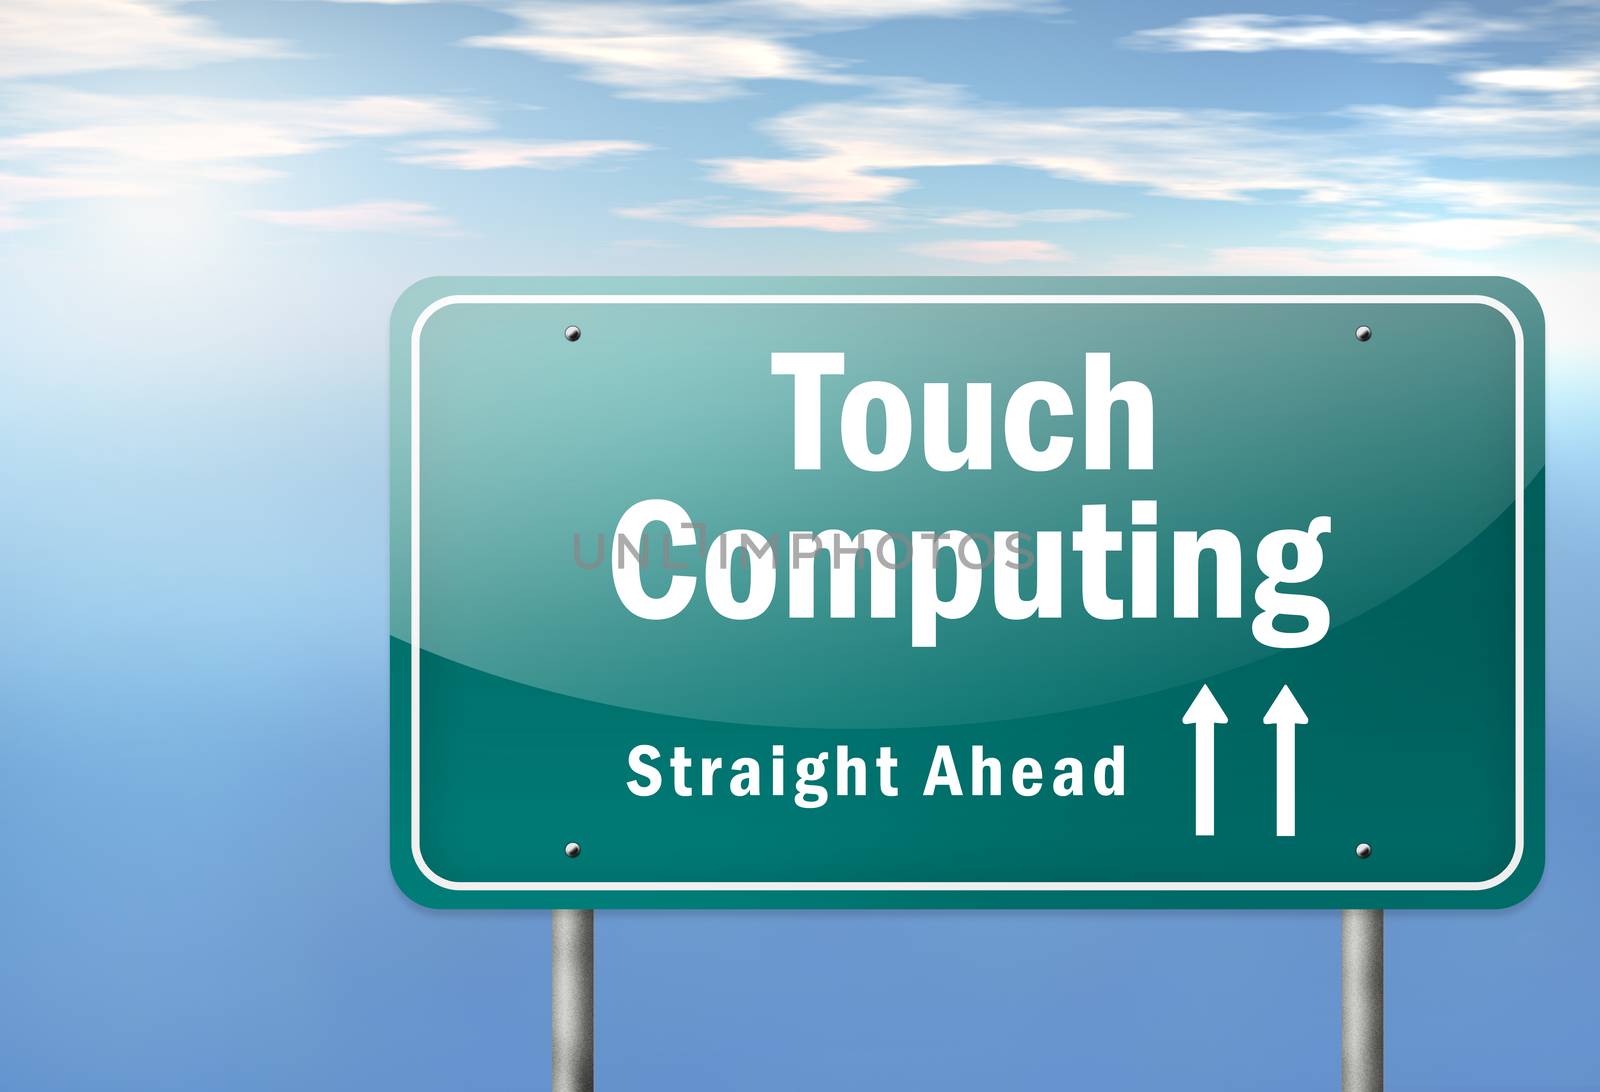 Highway Signpost with Touch Computing wording